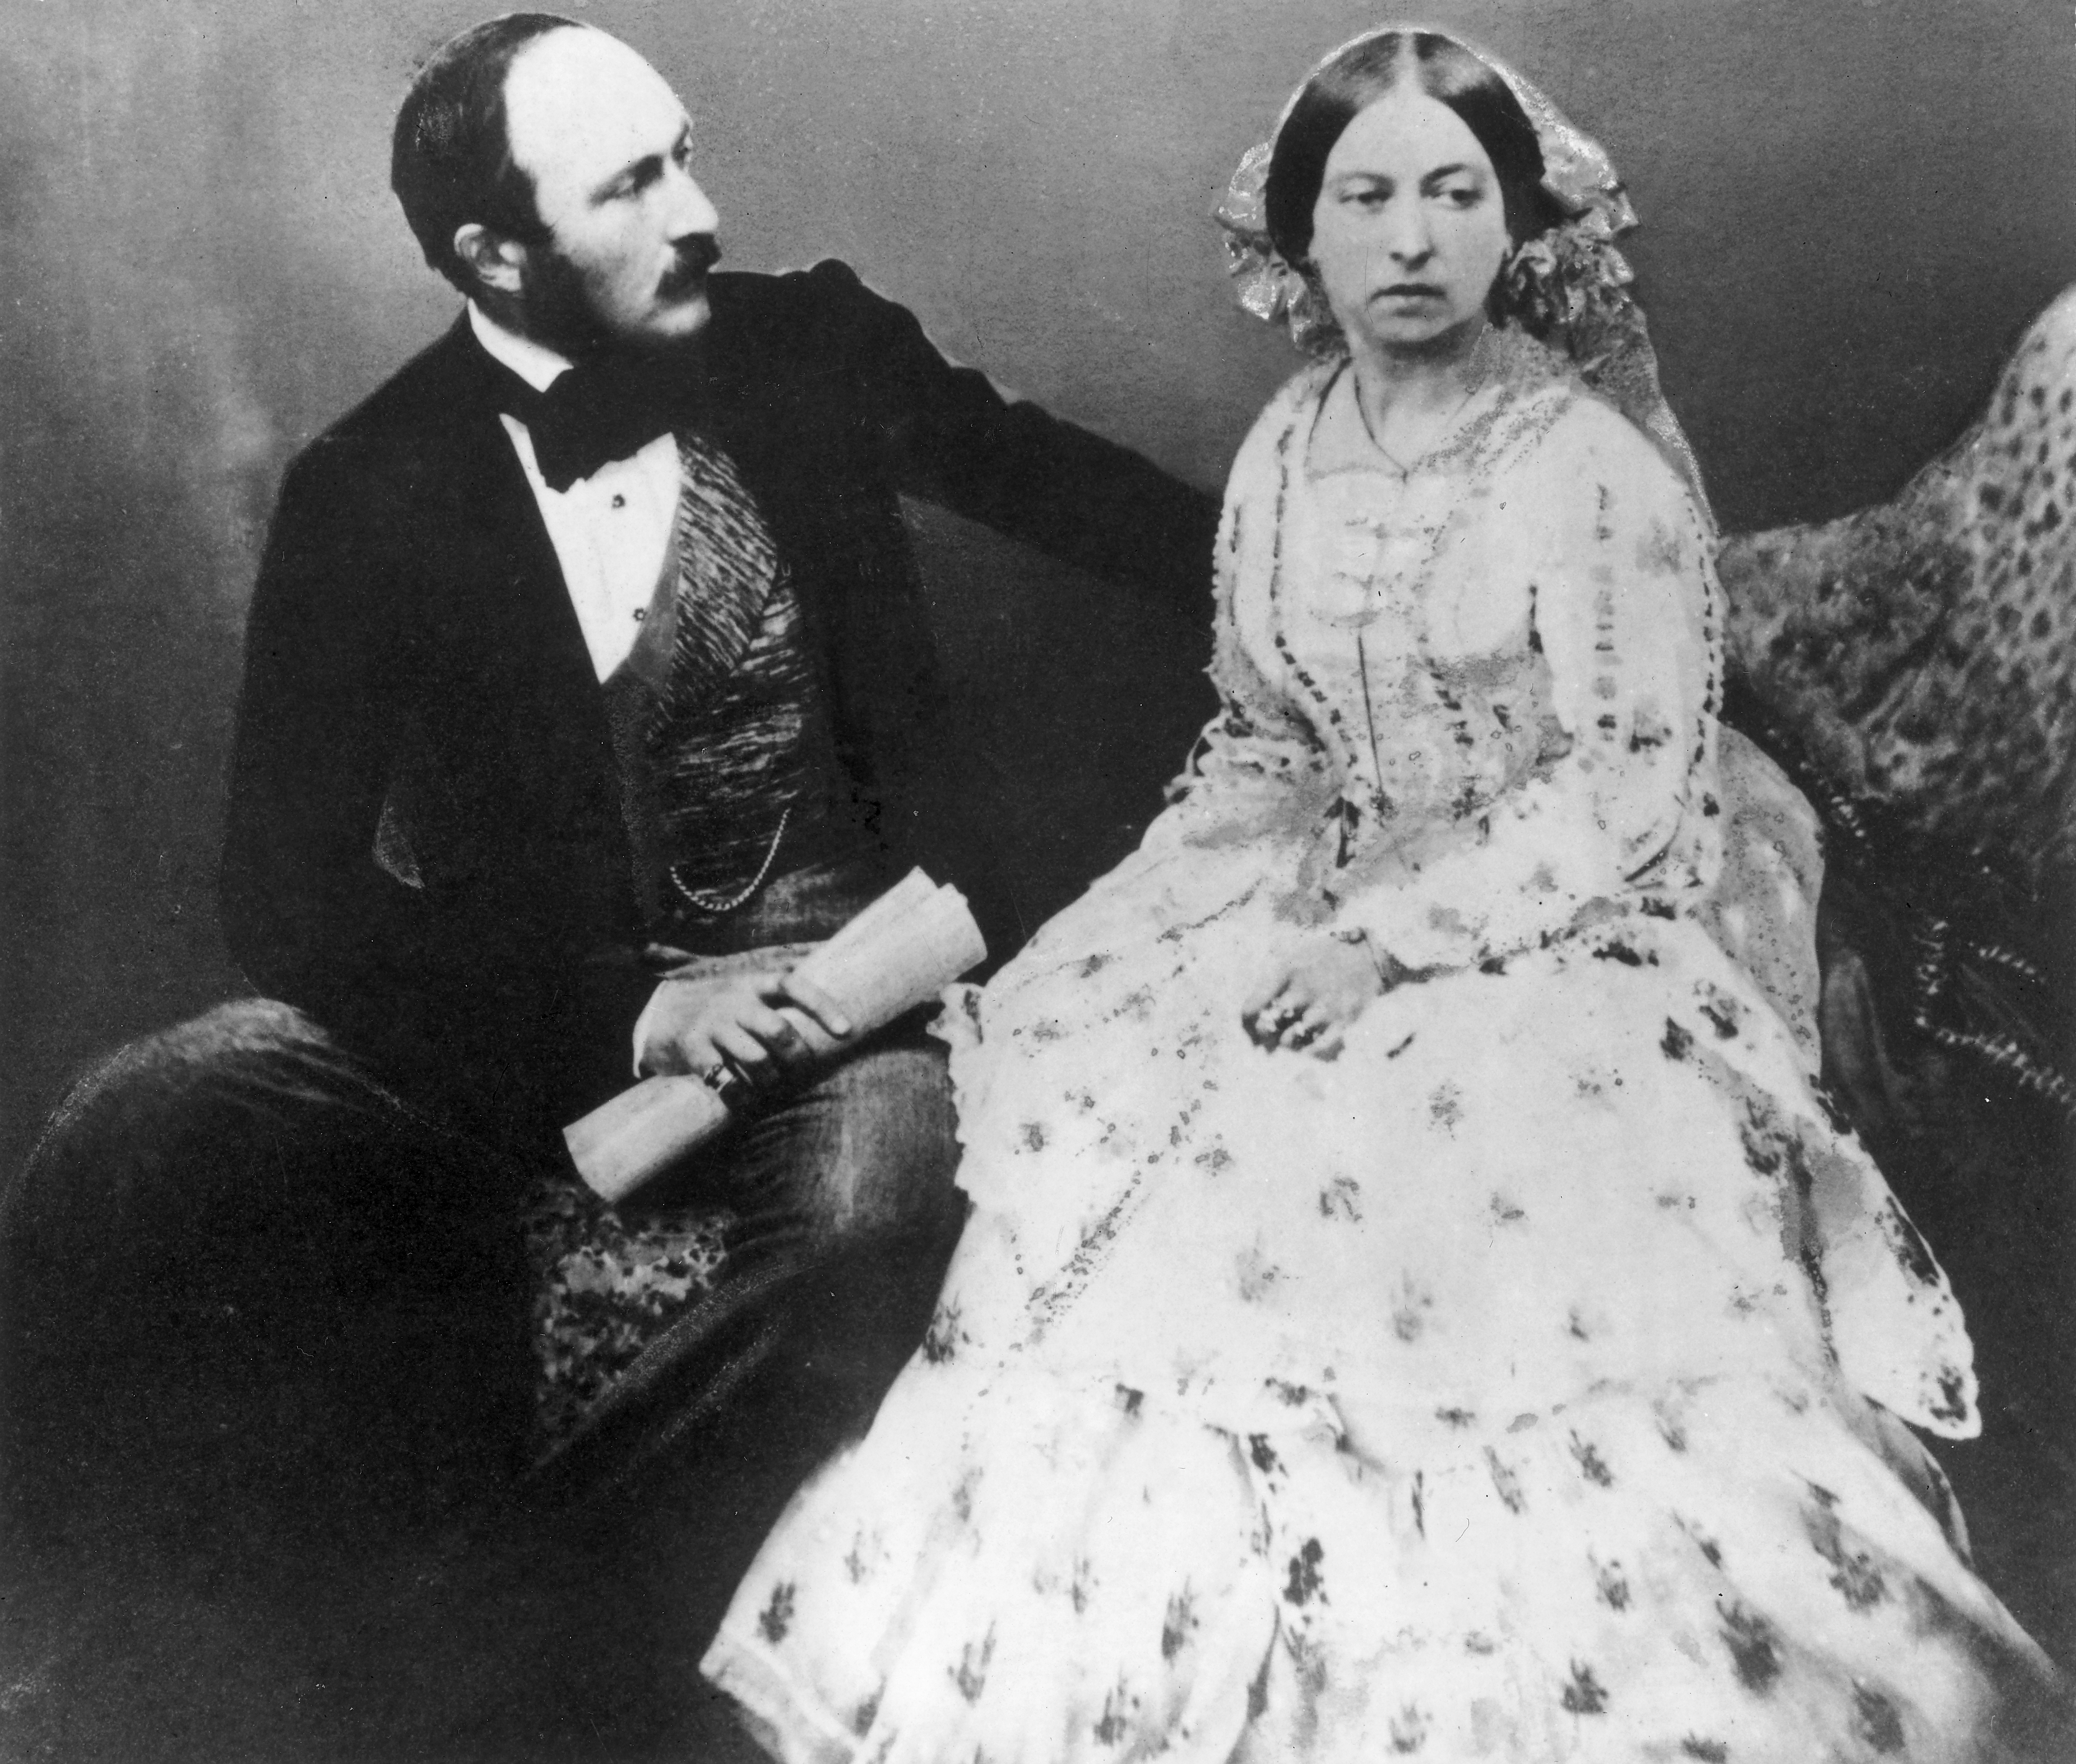 Queen Victoria (1819 - 1901) and Prince Albert (1819 - 1861), five years after their marriage | Source: Getty Images